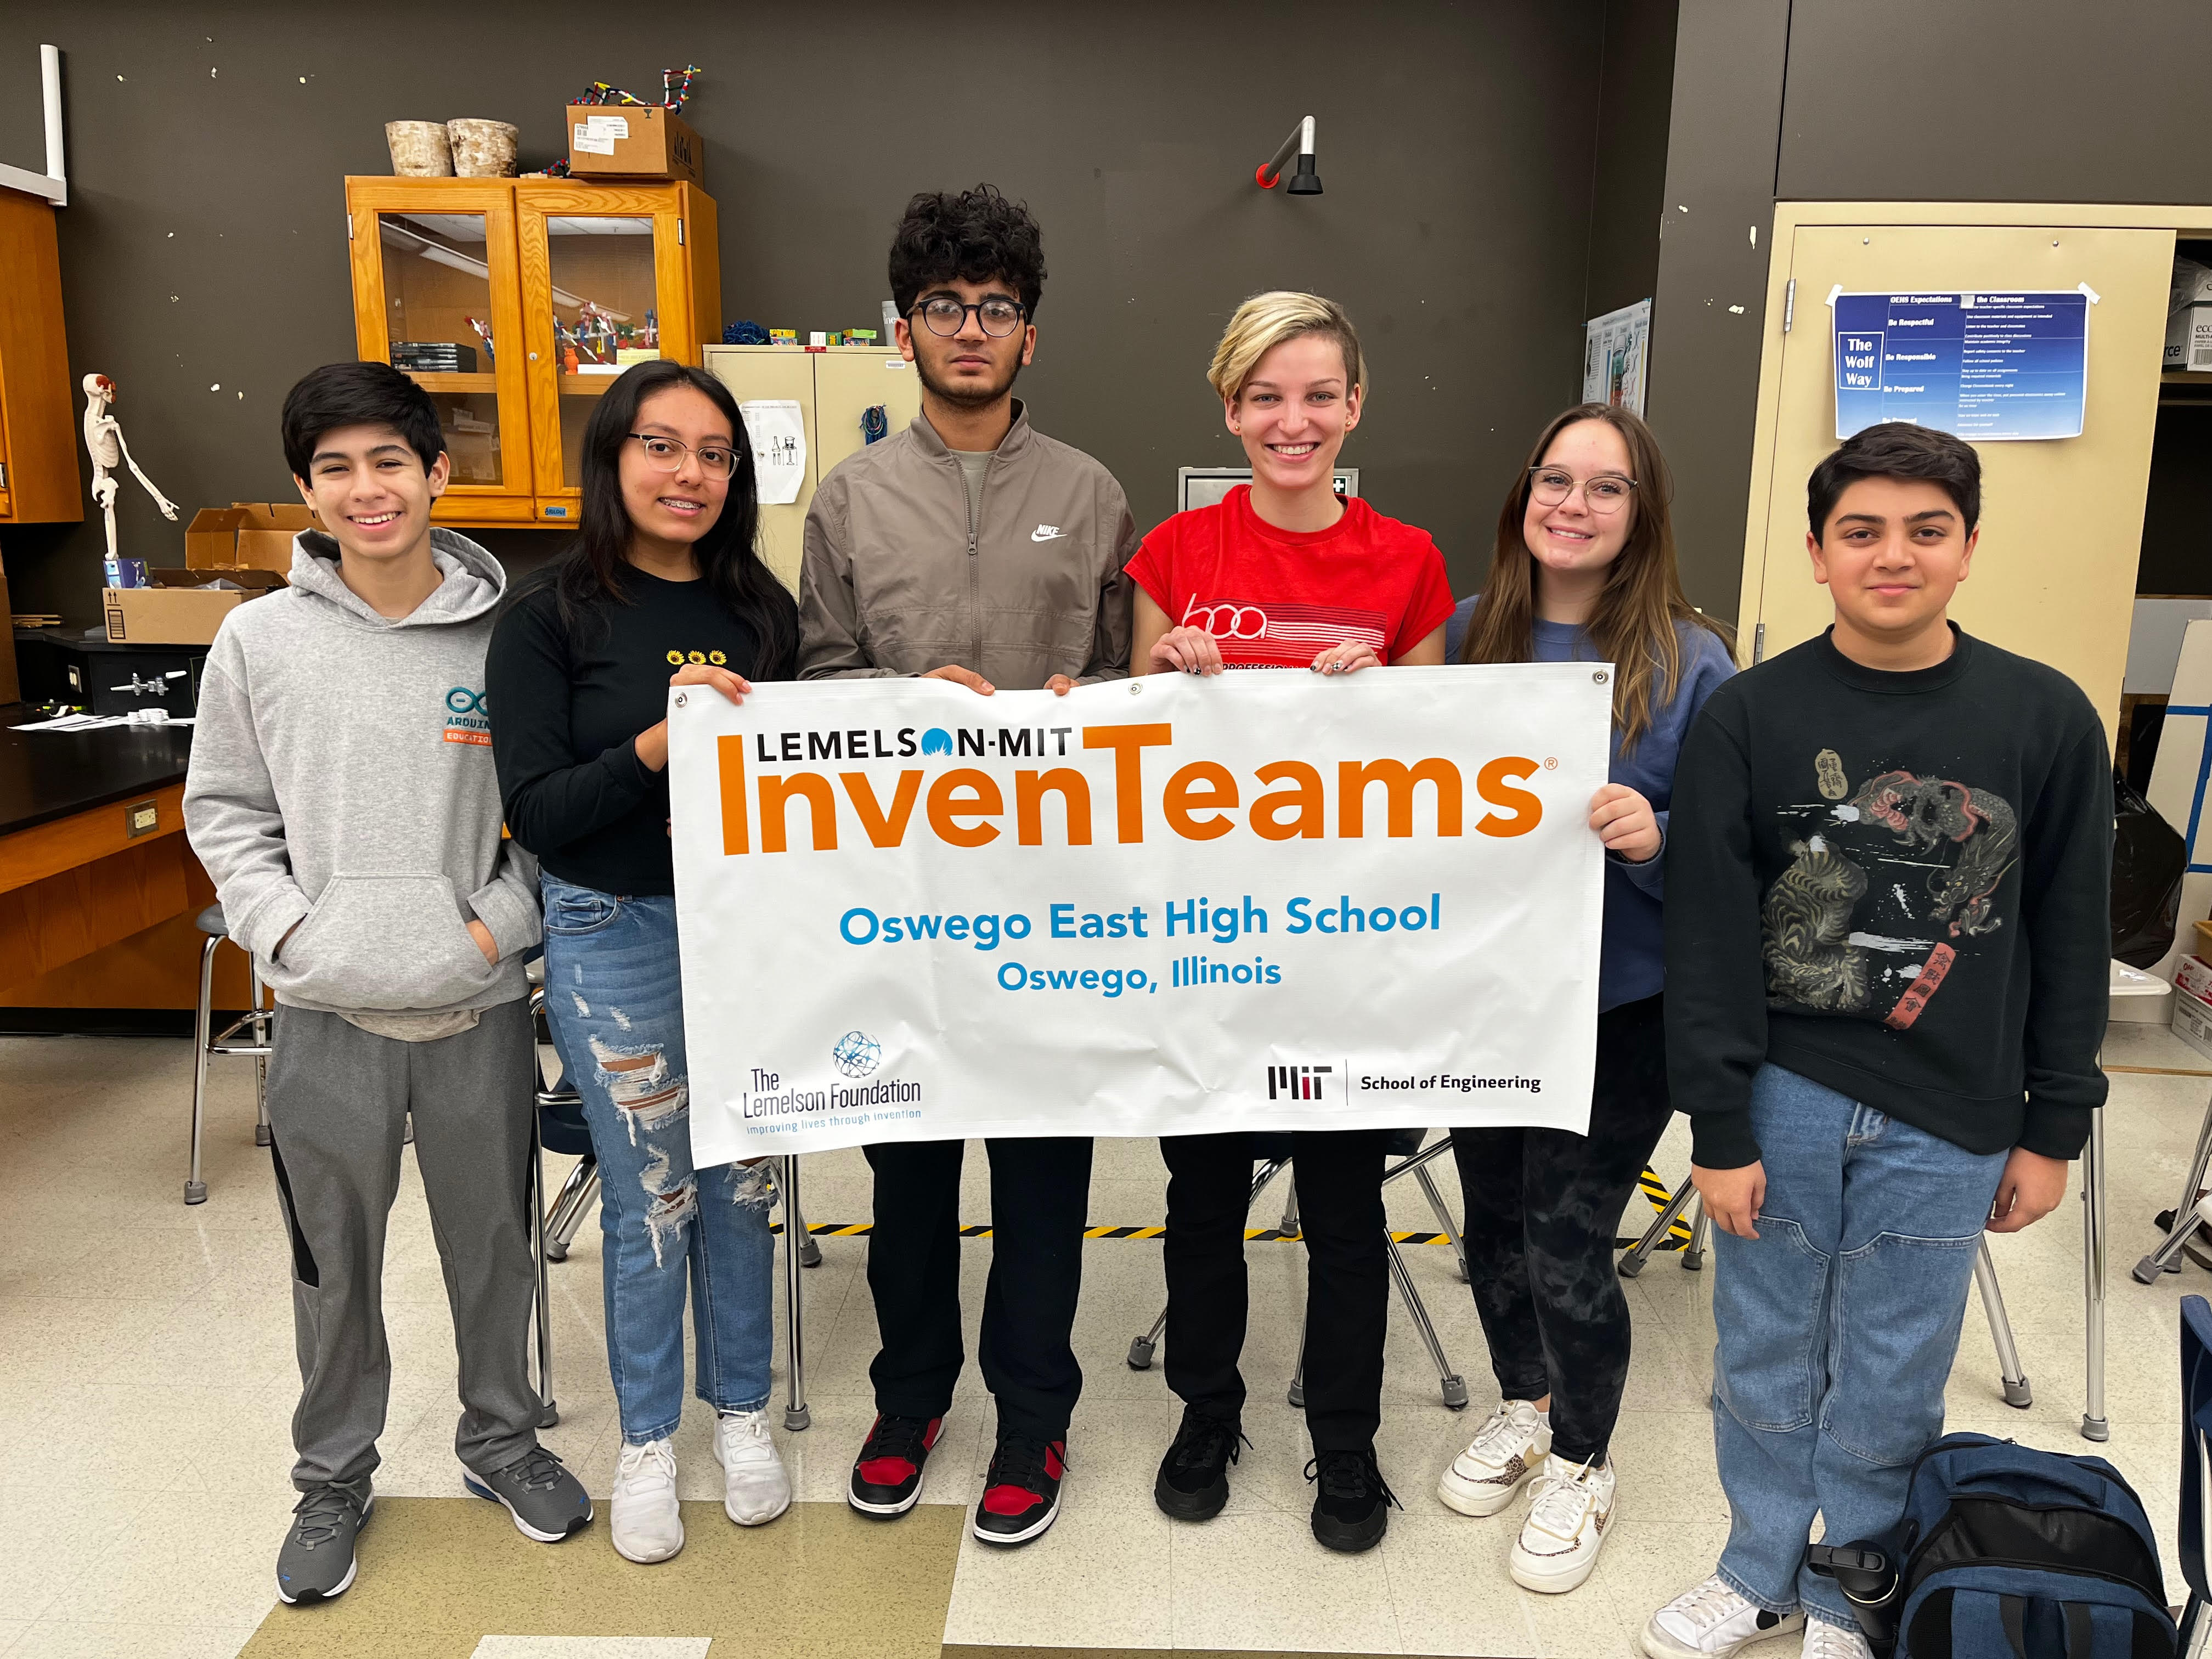 Here is a photo of the Oswego East InvenTeam with their official banner.